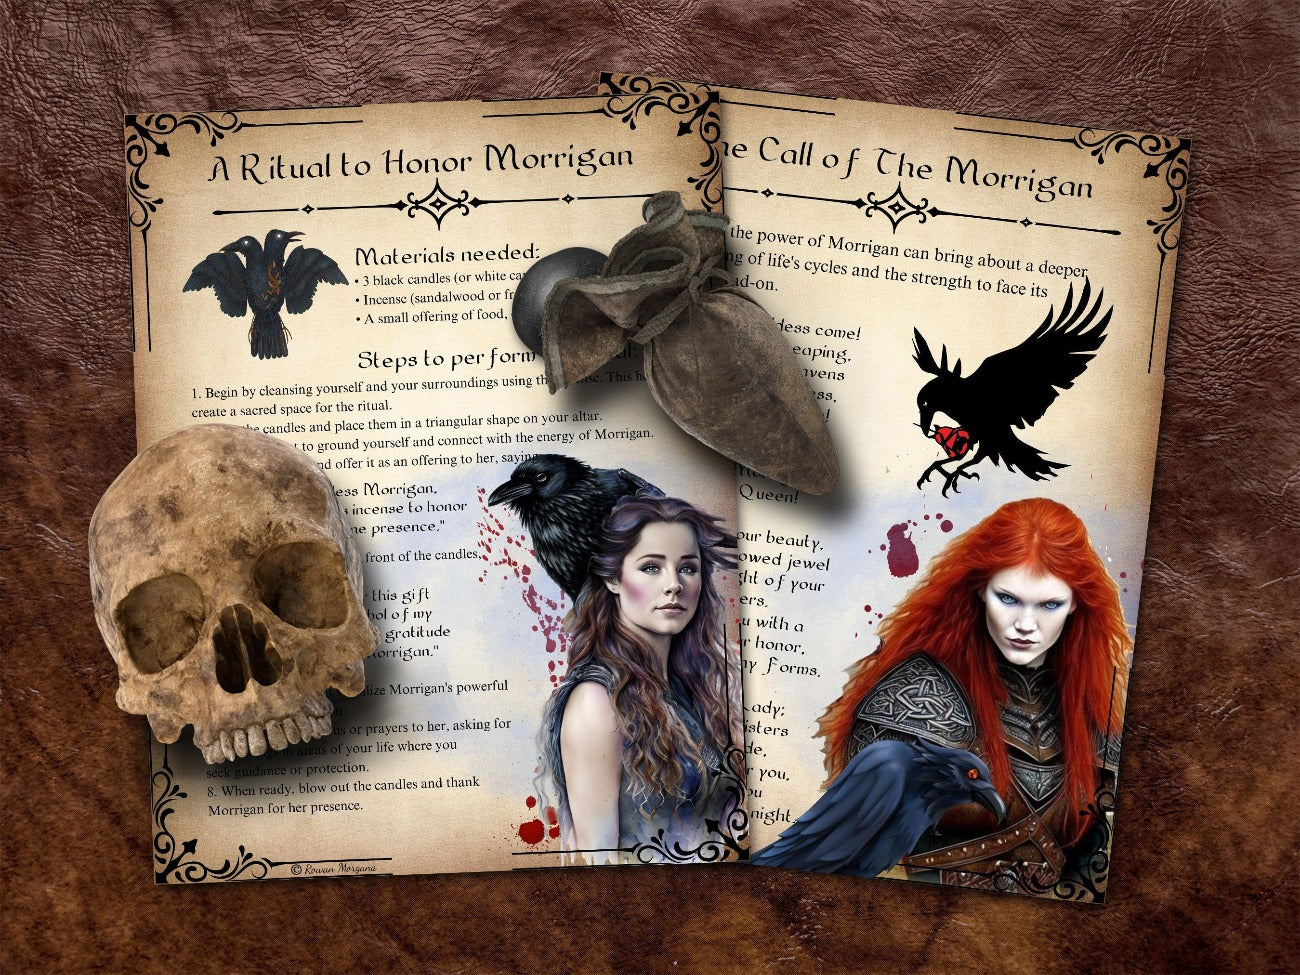 A Ritual to Honor Morrigan and The Call of the Morrigan, Printable Spell Book pages, Celtic Mythology Raven Diety, Wicca Dark Goddess Samhain Grimoire, Halloween Altar Prayers - Morgana Magick Spell